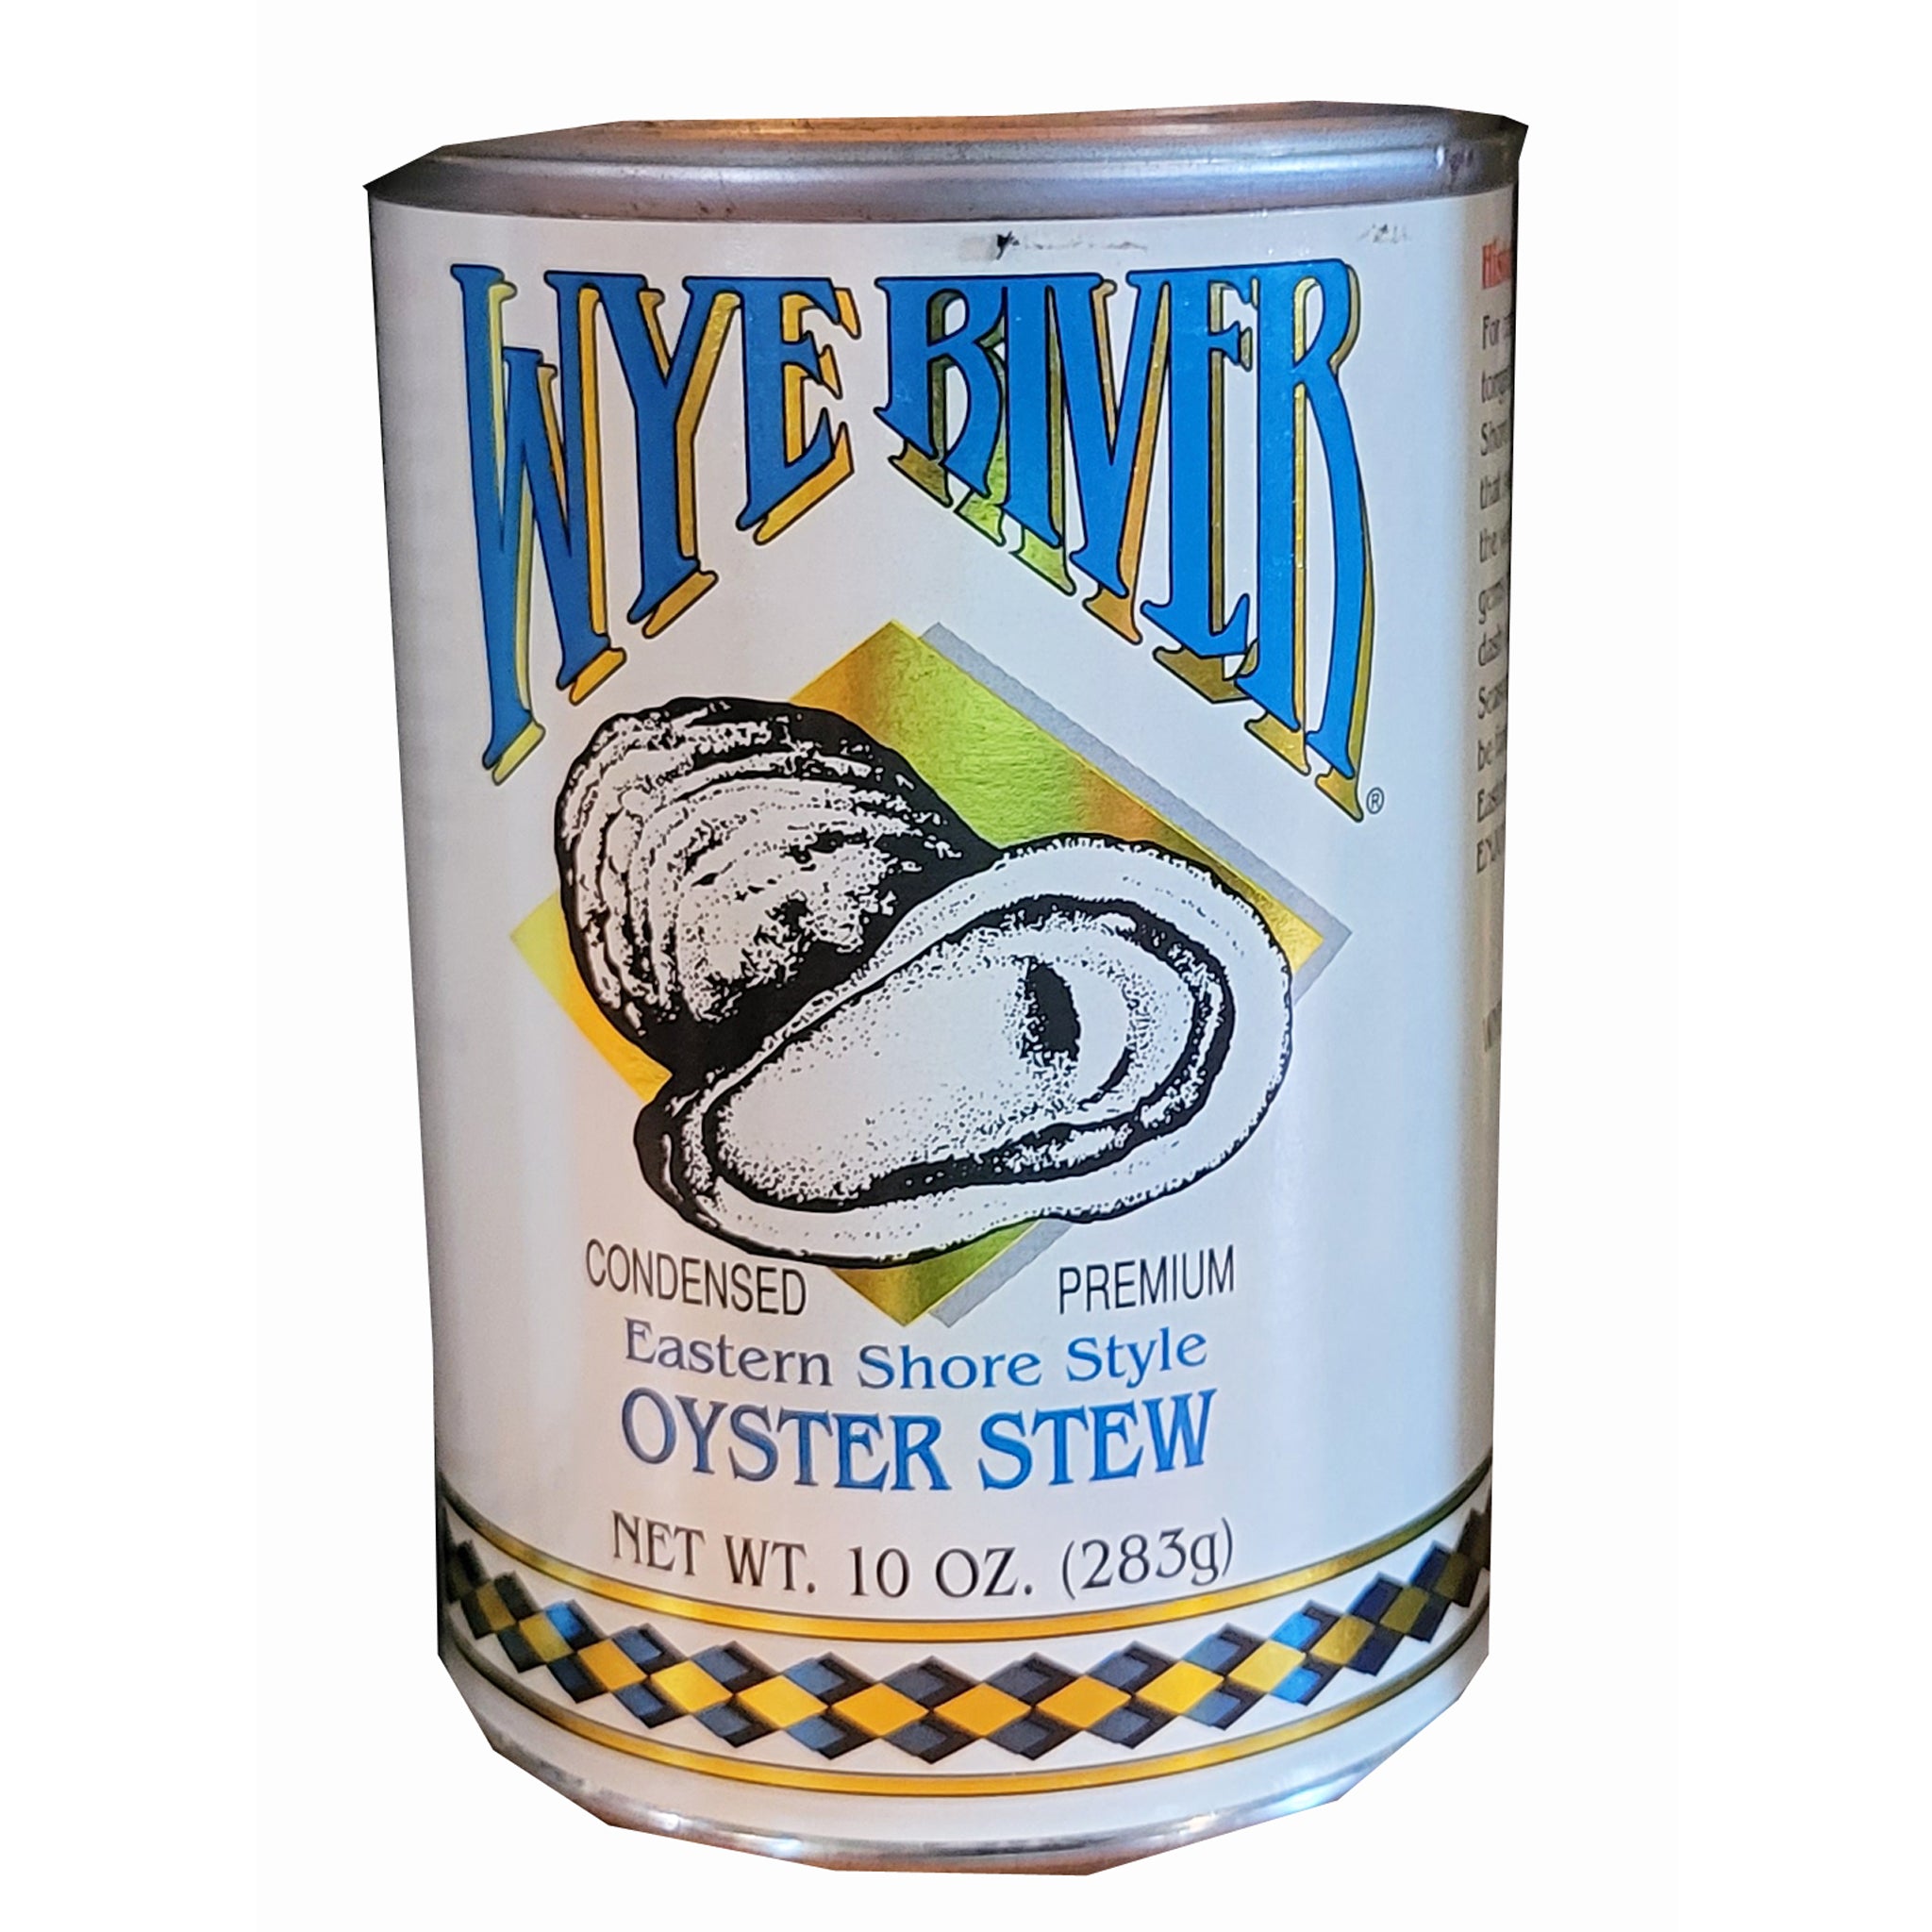 6 CANS Hilton's Oyster Stew made with fresh milk and butter 10 oz Can  Chowder 71540200052